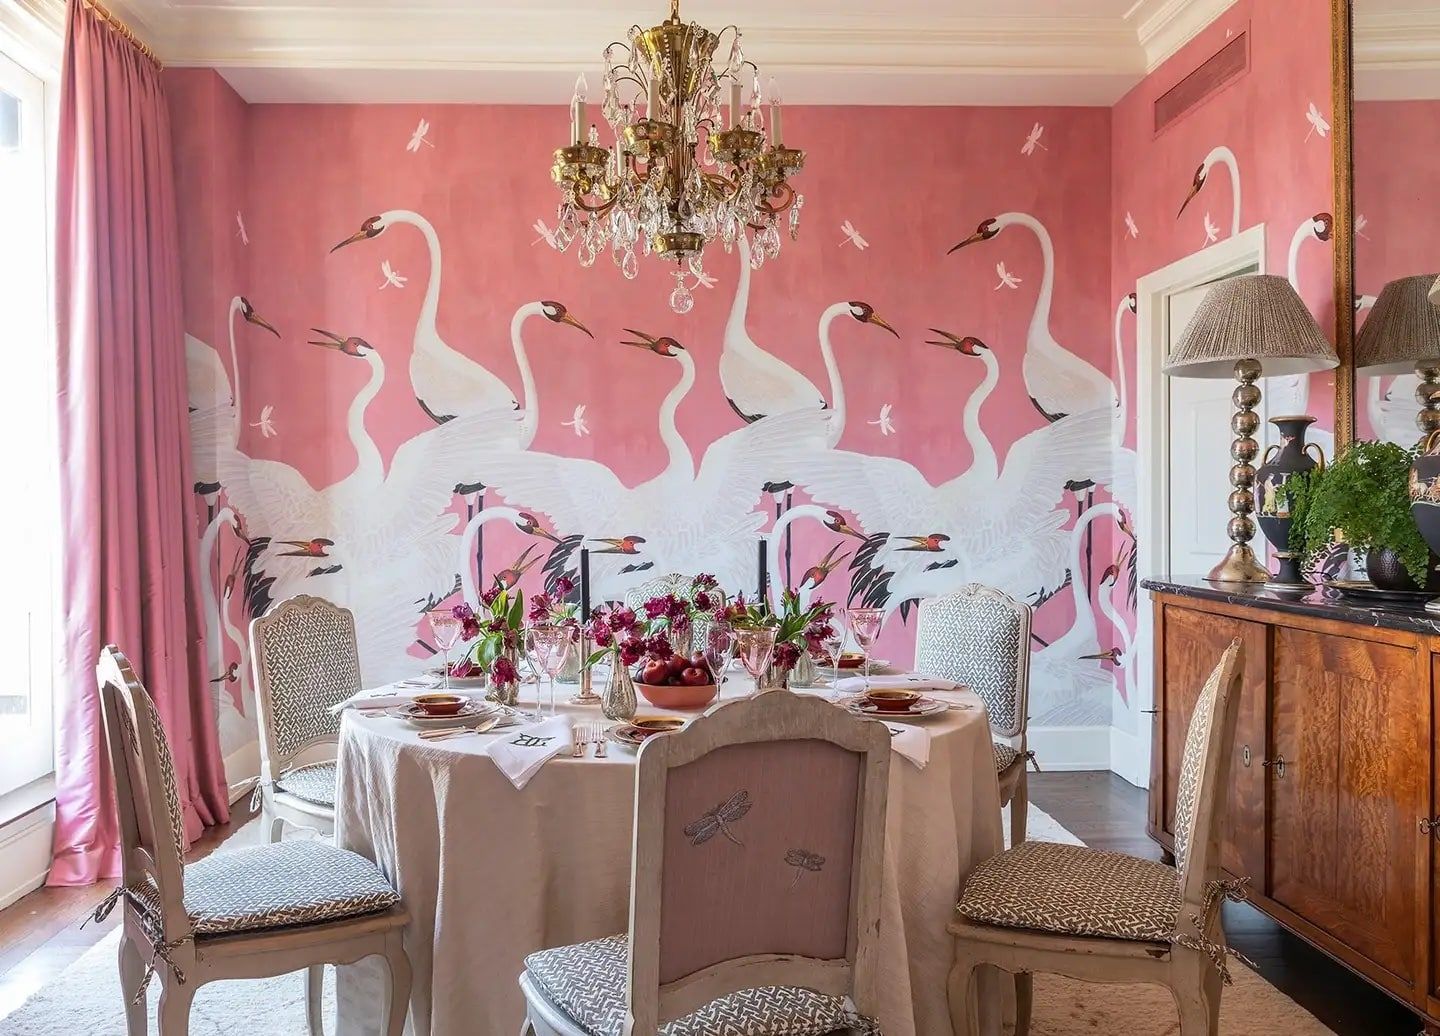 Inside a Barbie Collector's Real-Life Dreamhouse